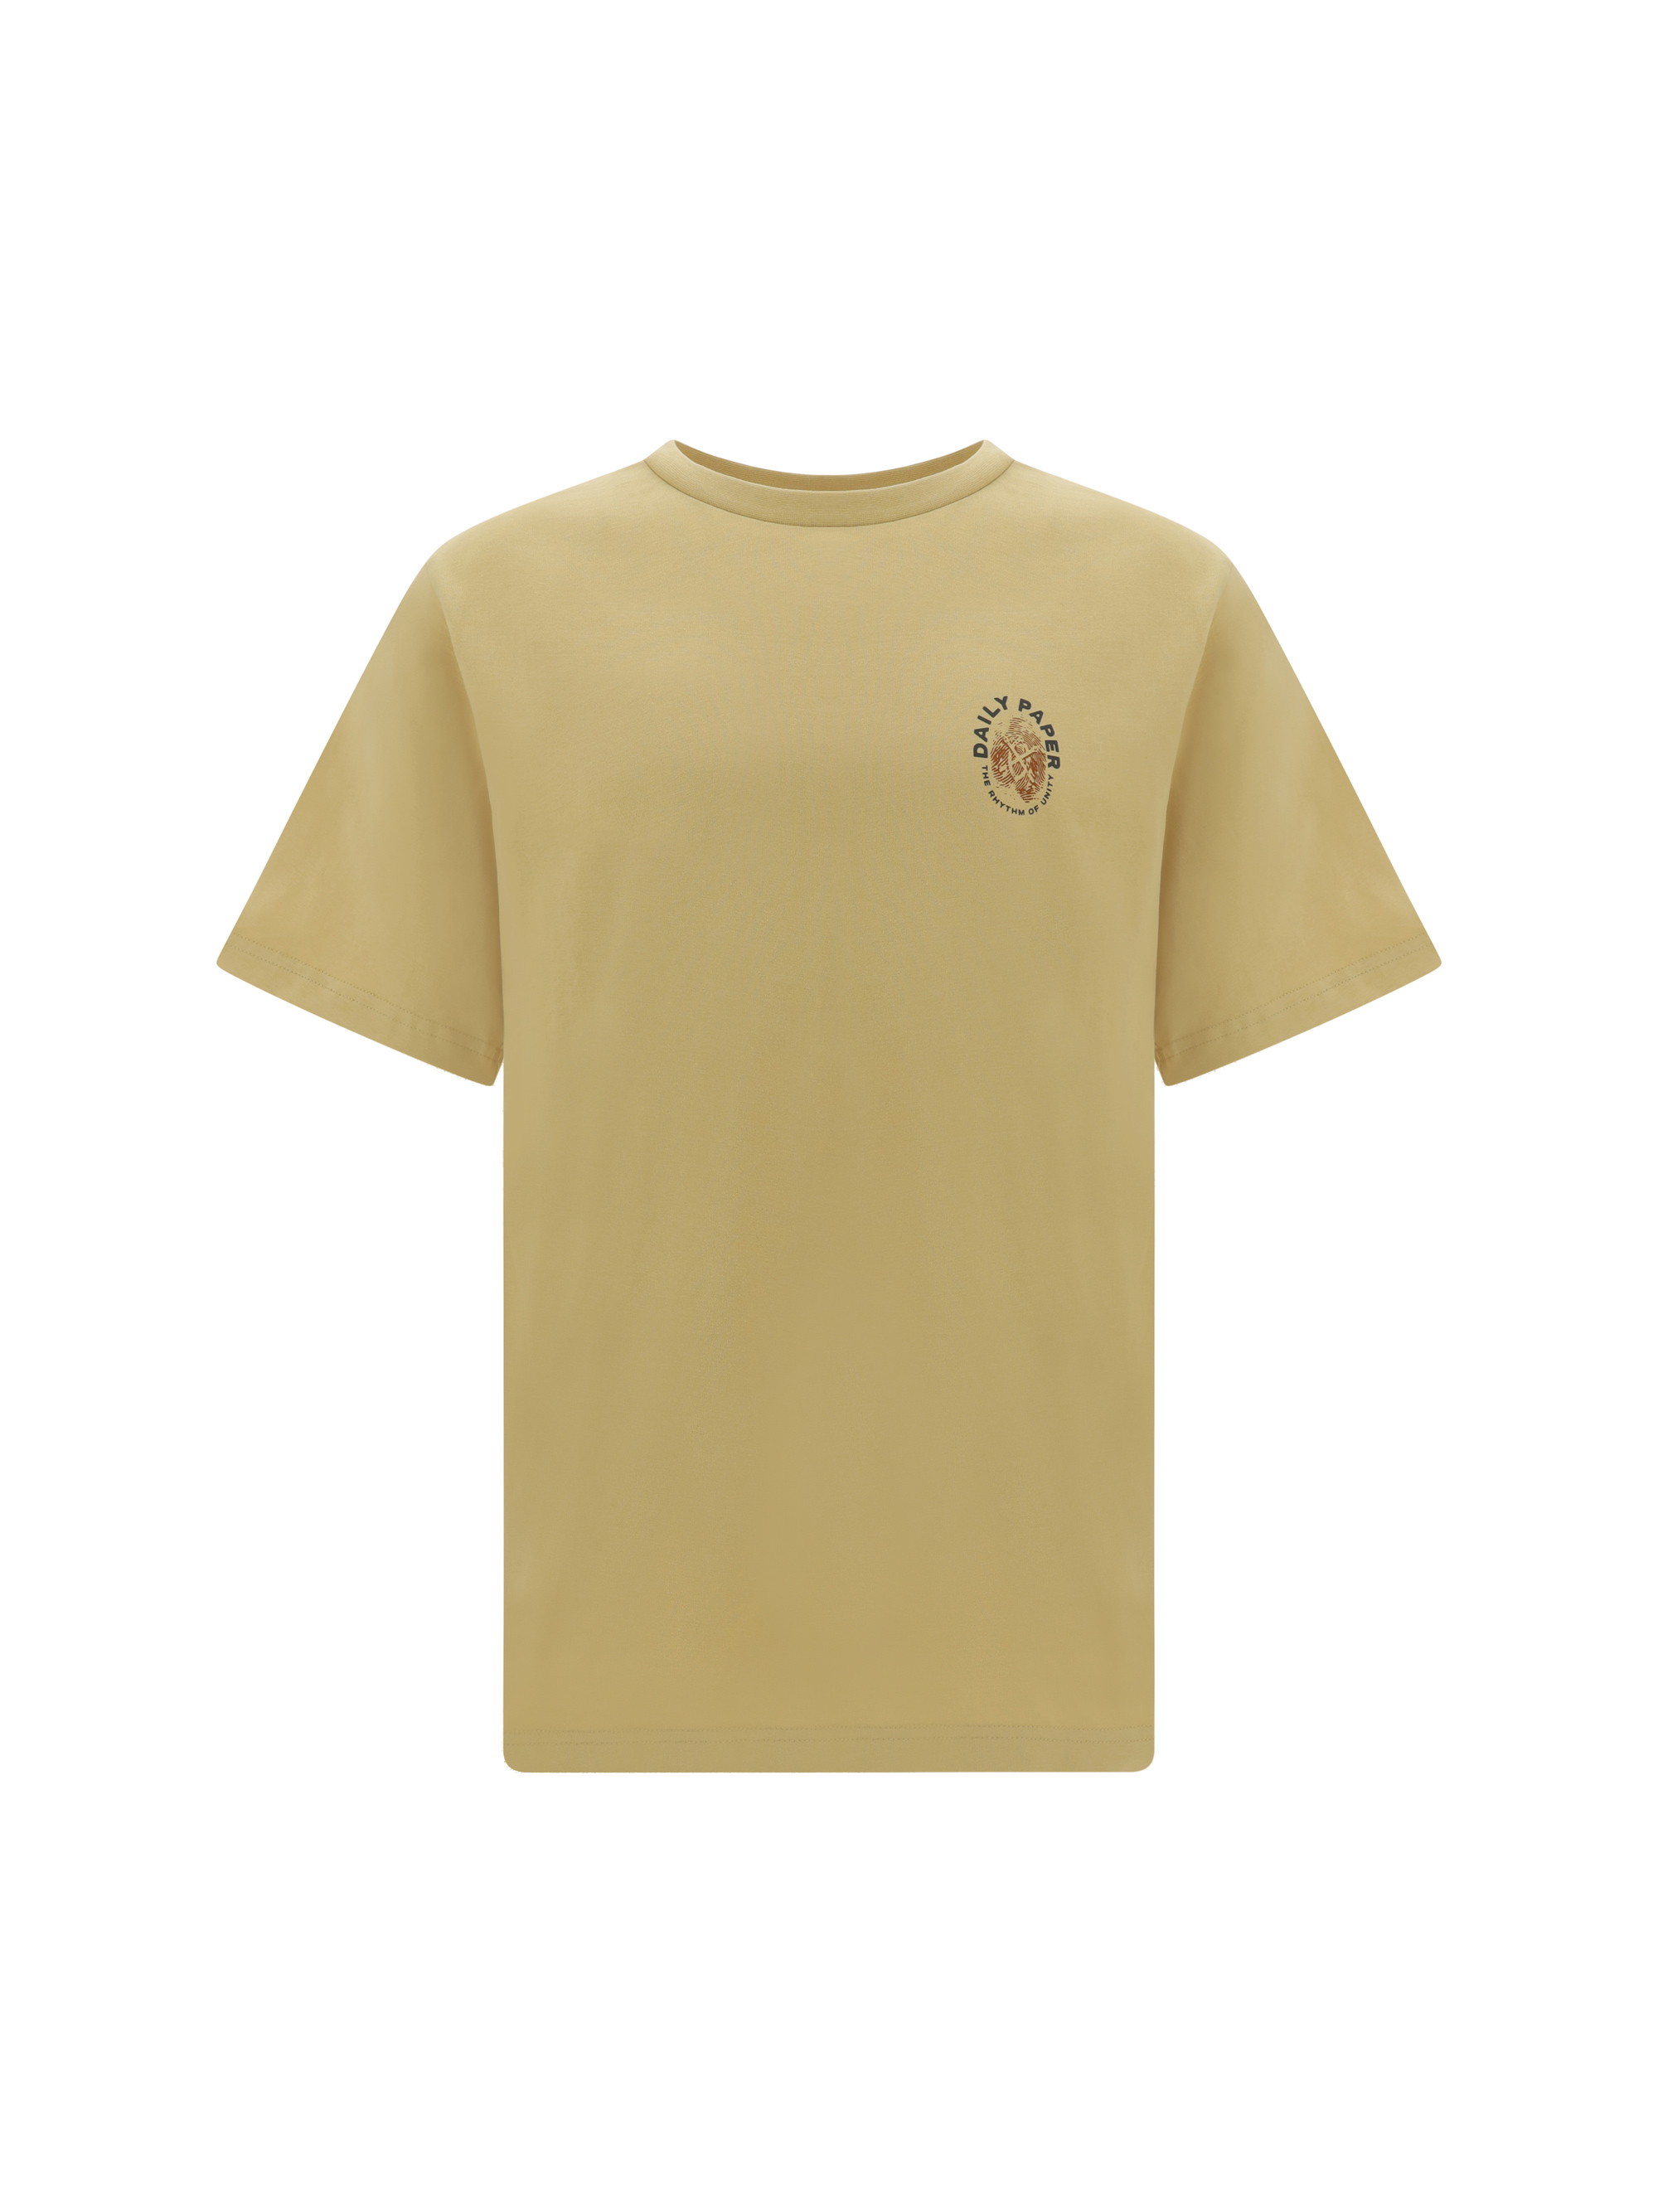 Shop Daily Paper Identity T-shirt In Taos Beige